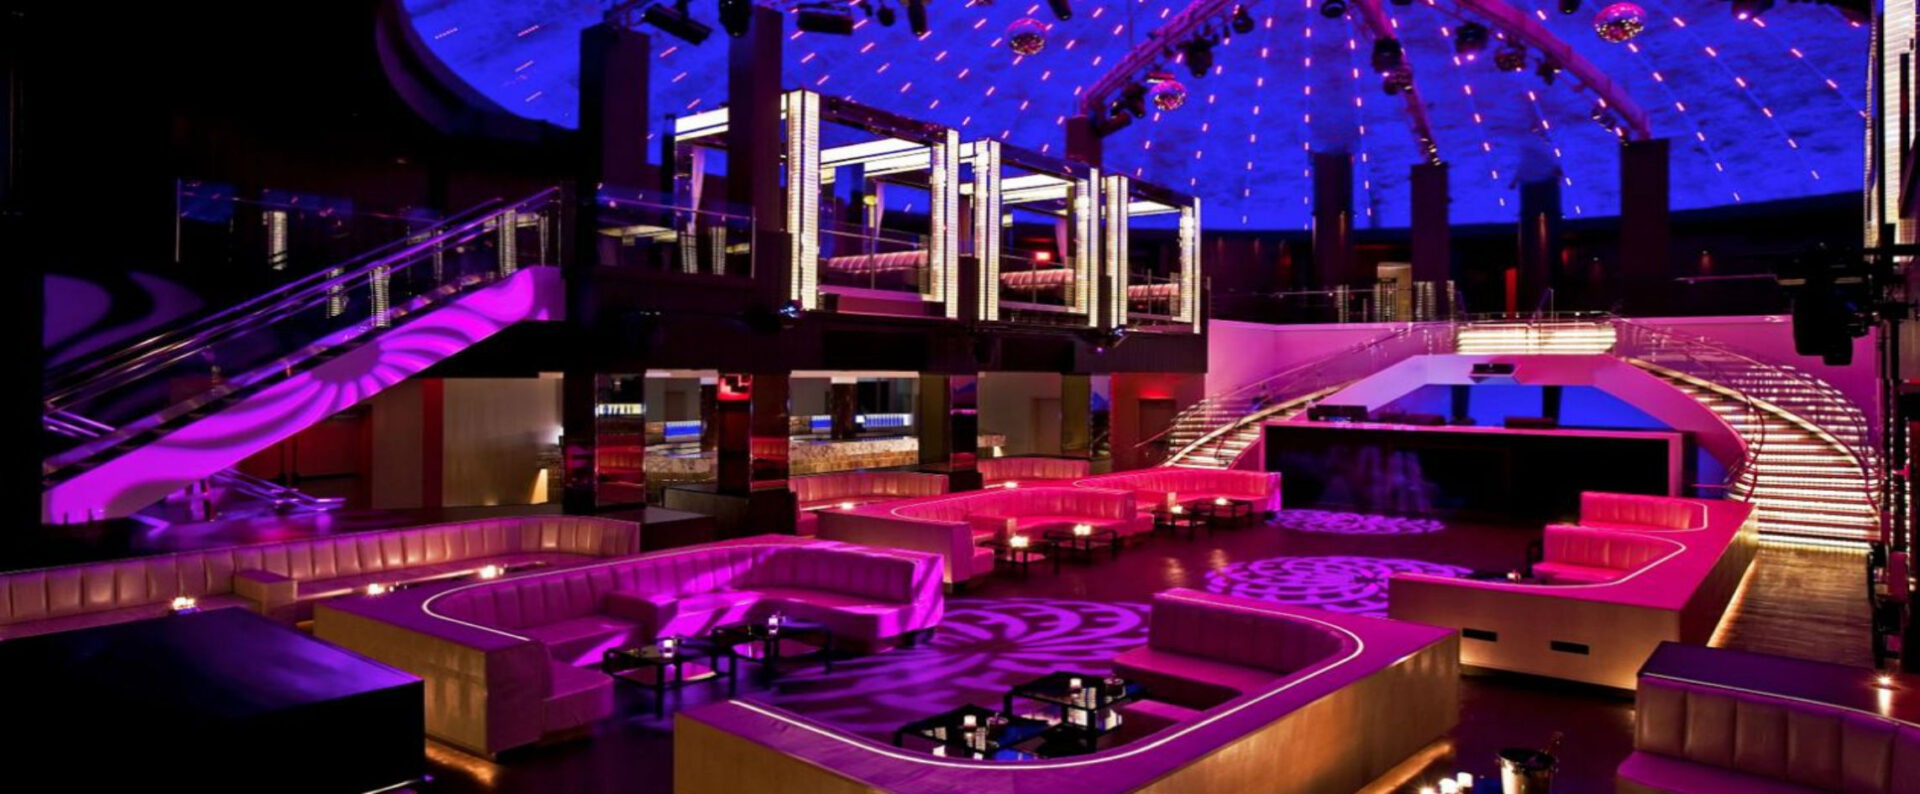 Night Clubs in Miami - Bottle Service and VIP Tables